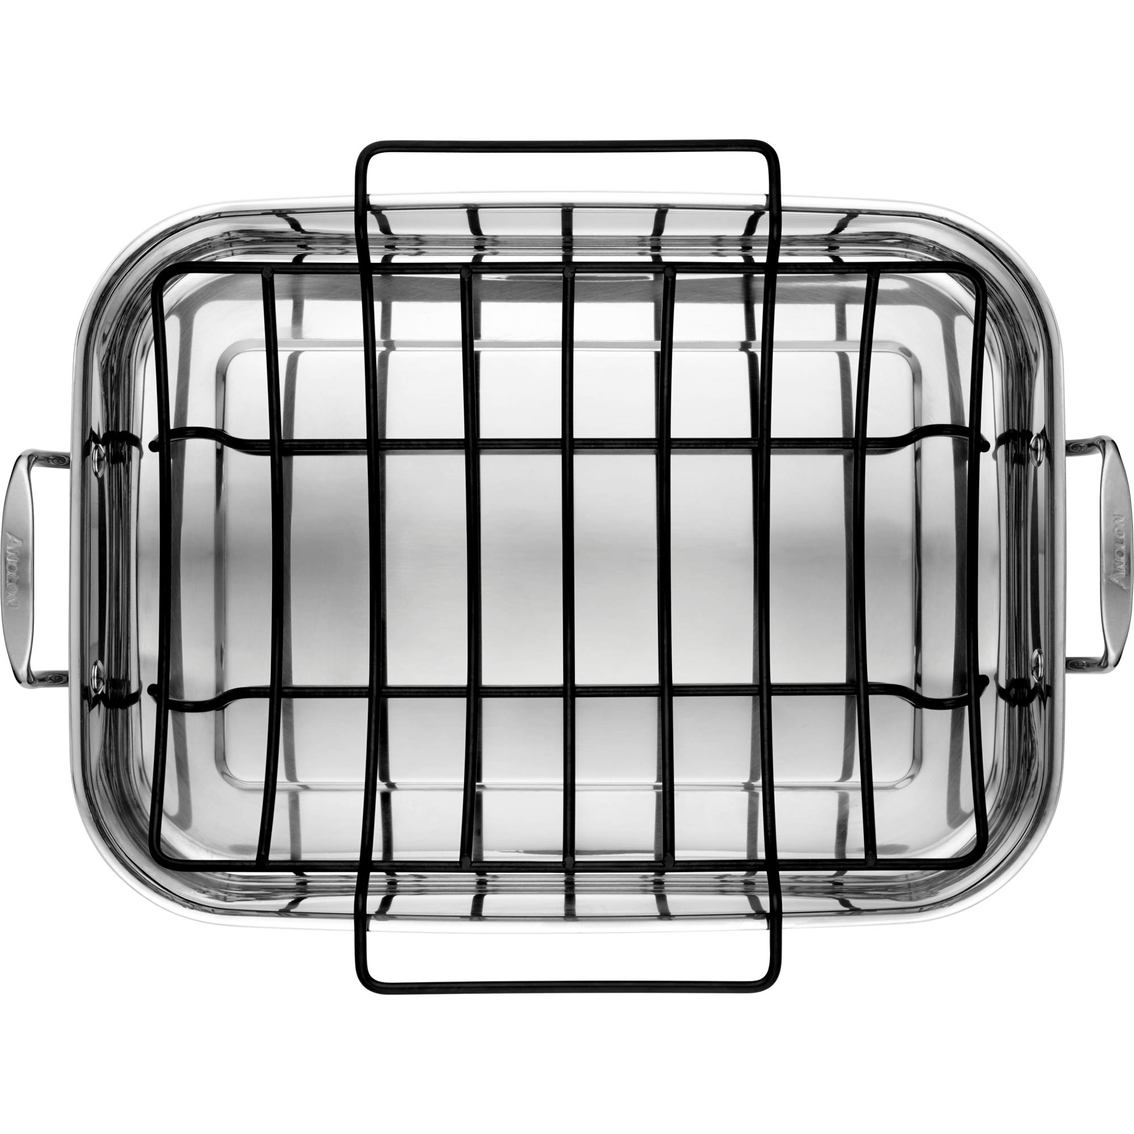 Anolon Tri Ply Clad Stainless Steel Large Rectangular Roaster with Nonstick Rack - Image 3 of 4